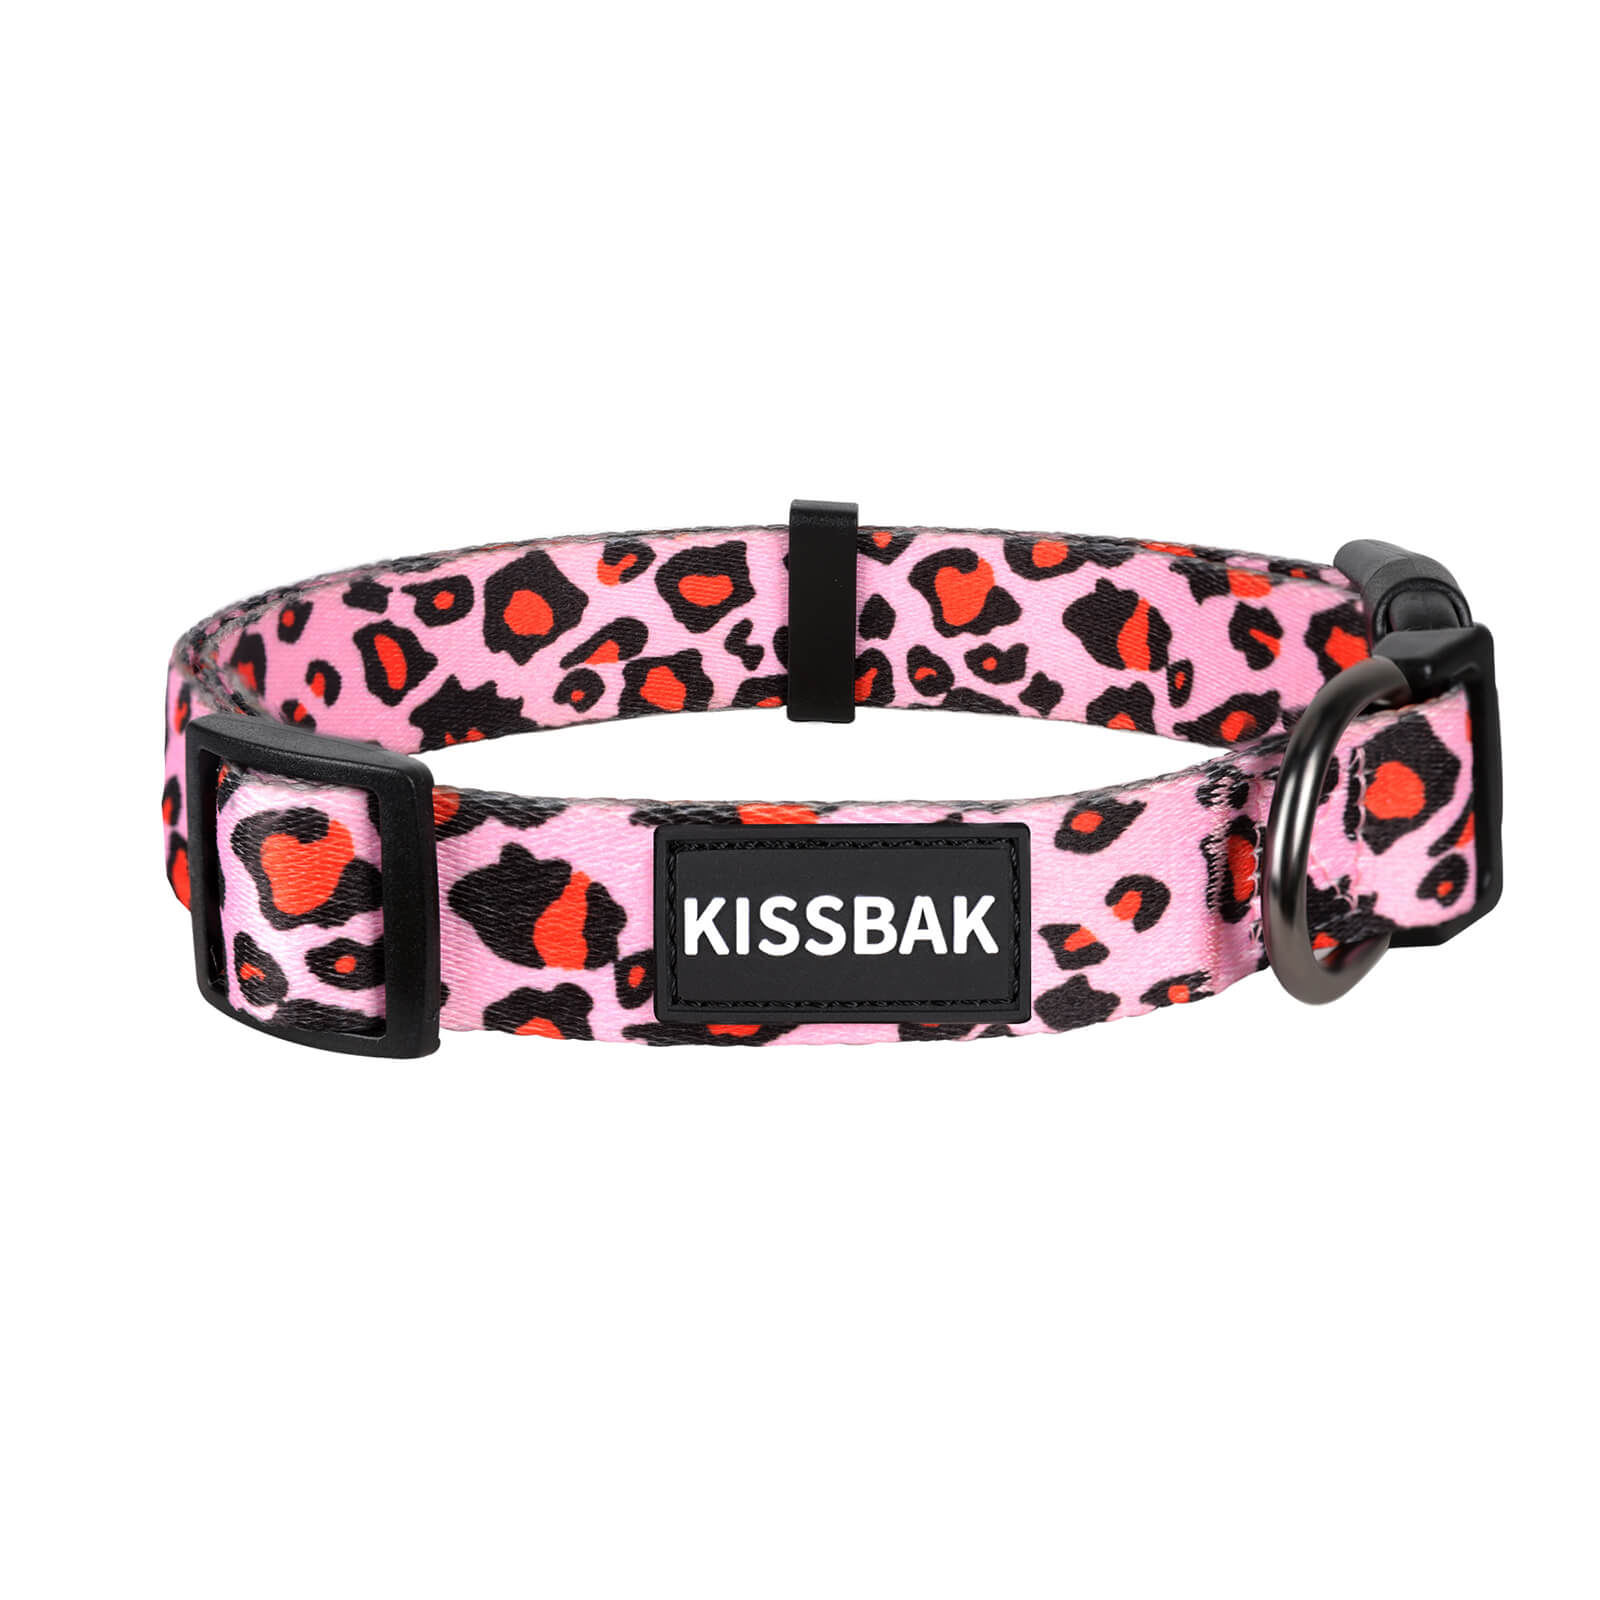 TDTOK Girl Dog Collar for Small Medium Large Dogs, Cute Dog Collar with  Detachable Flower Safety Metal Buckle Adjustable Floral Pattern Soft Comfy